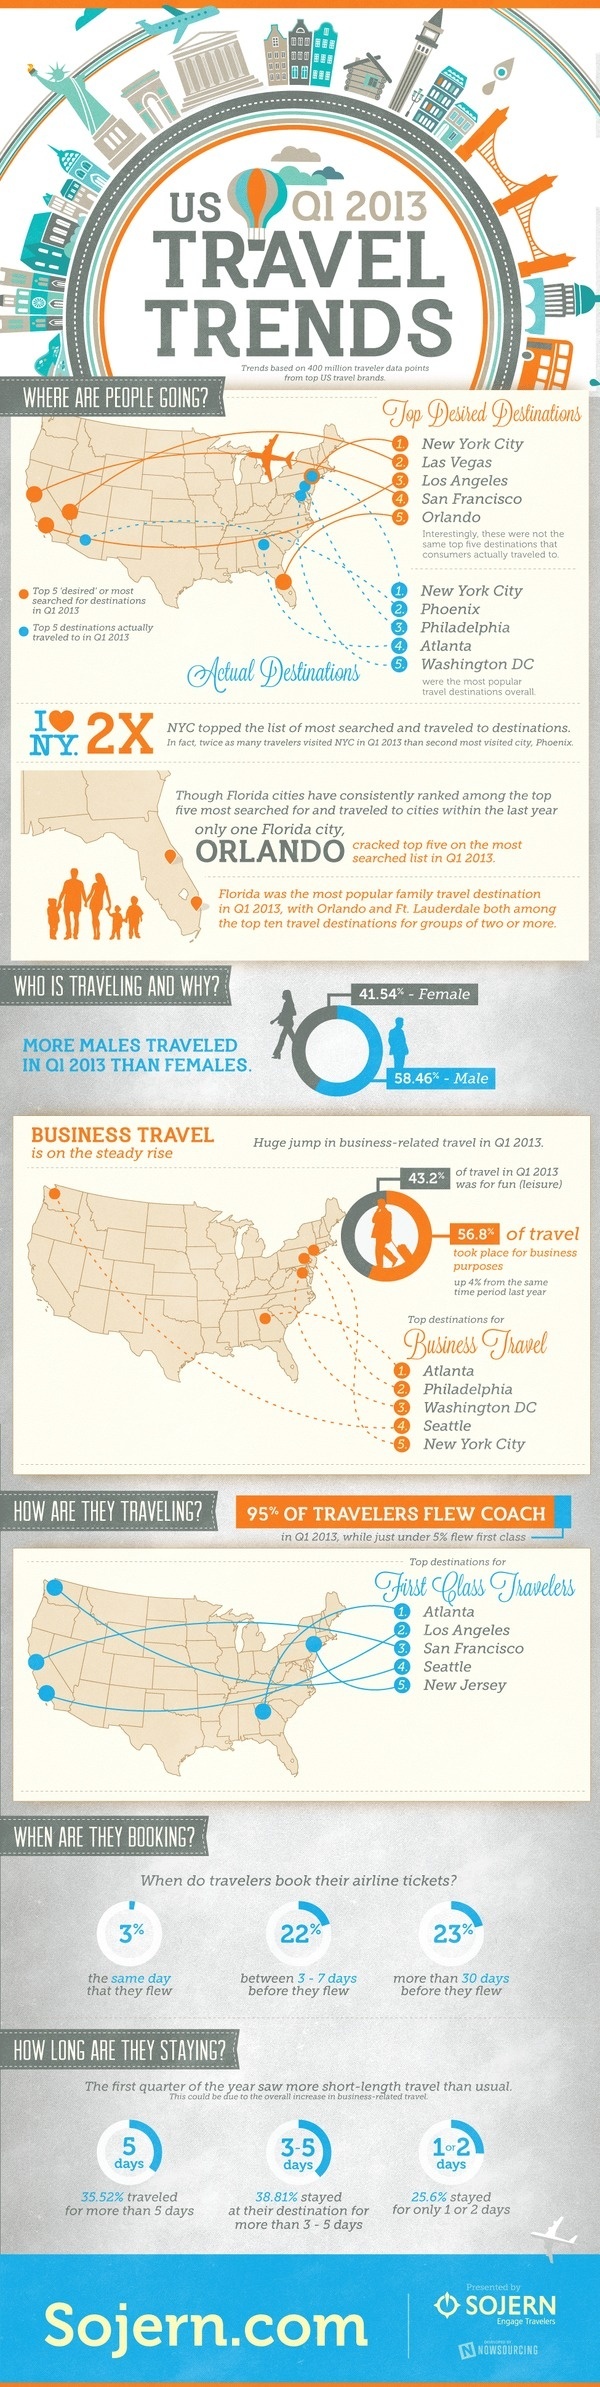 Travel Trends Infographic #infographic #design #graphic